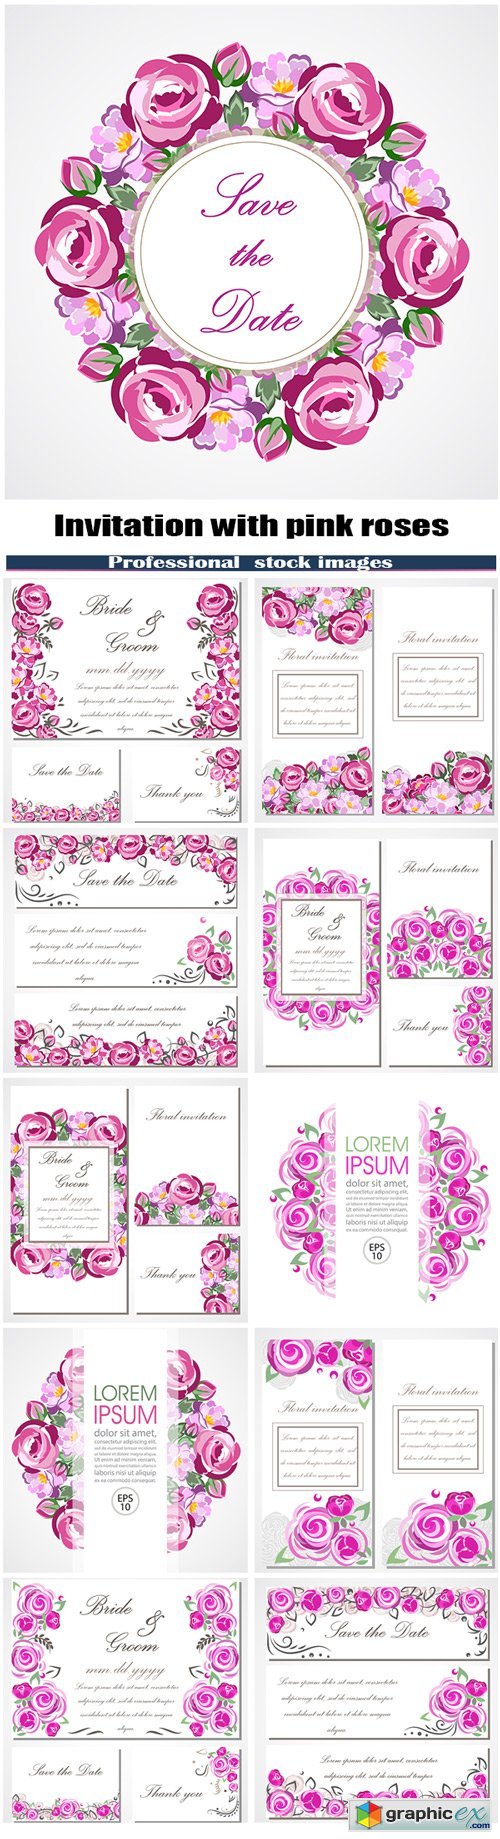 invitation card with pink roses for wedding